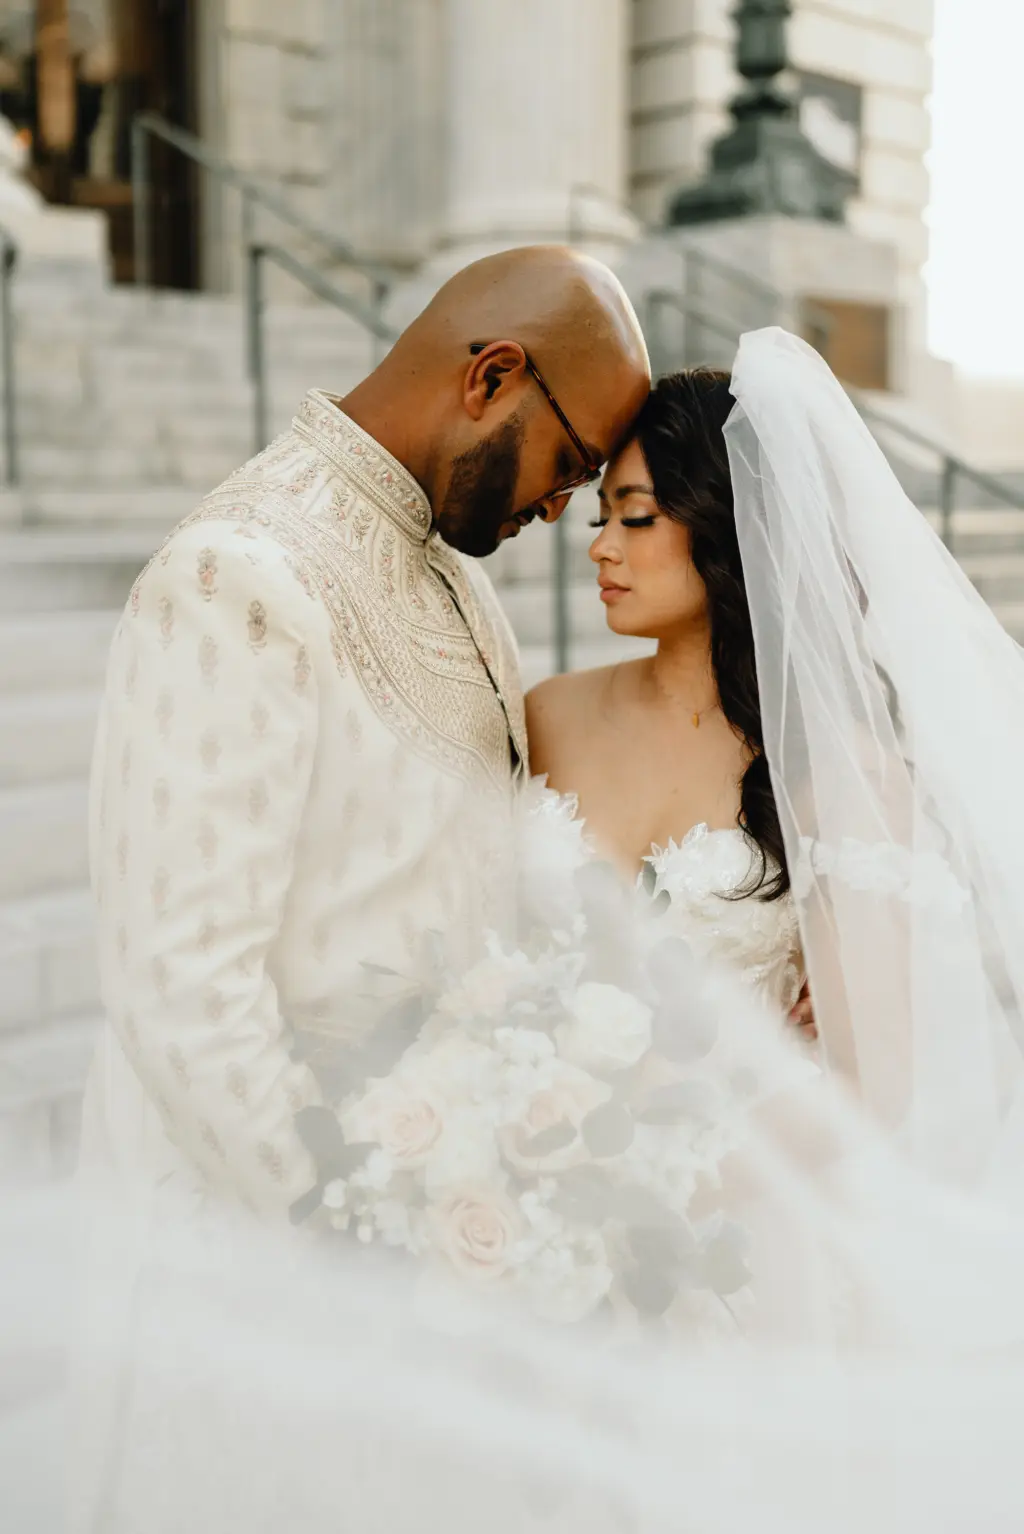 Bride and Groom Intimate Forehead Touch Wedding Portrait | Downtown Tampa Wedding Venue Le Meridien | Tampa Hair and Makeup Femme Akoi | Videographer Shannon Kelly Films | Photographer J&S Media